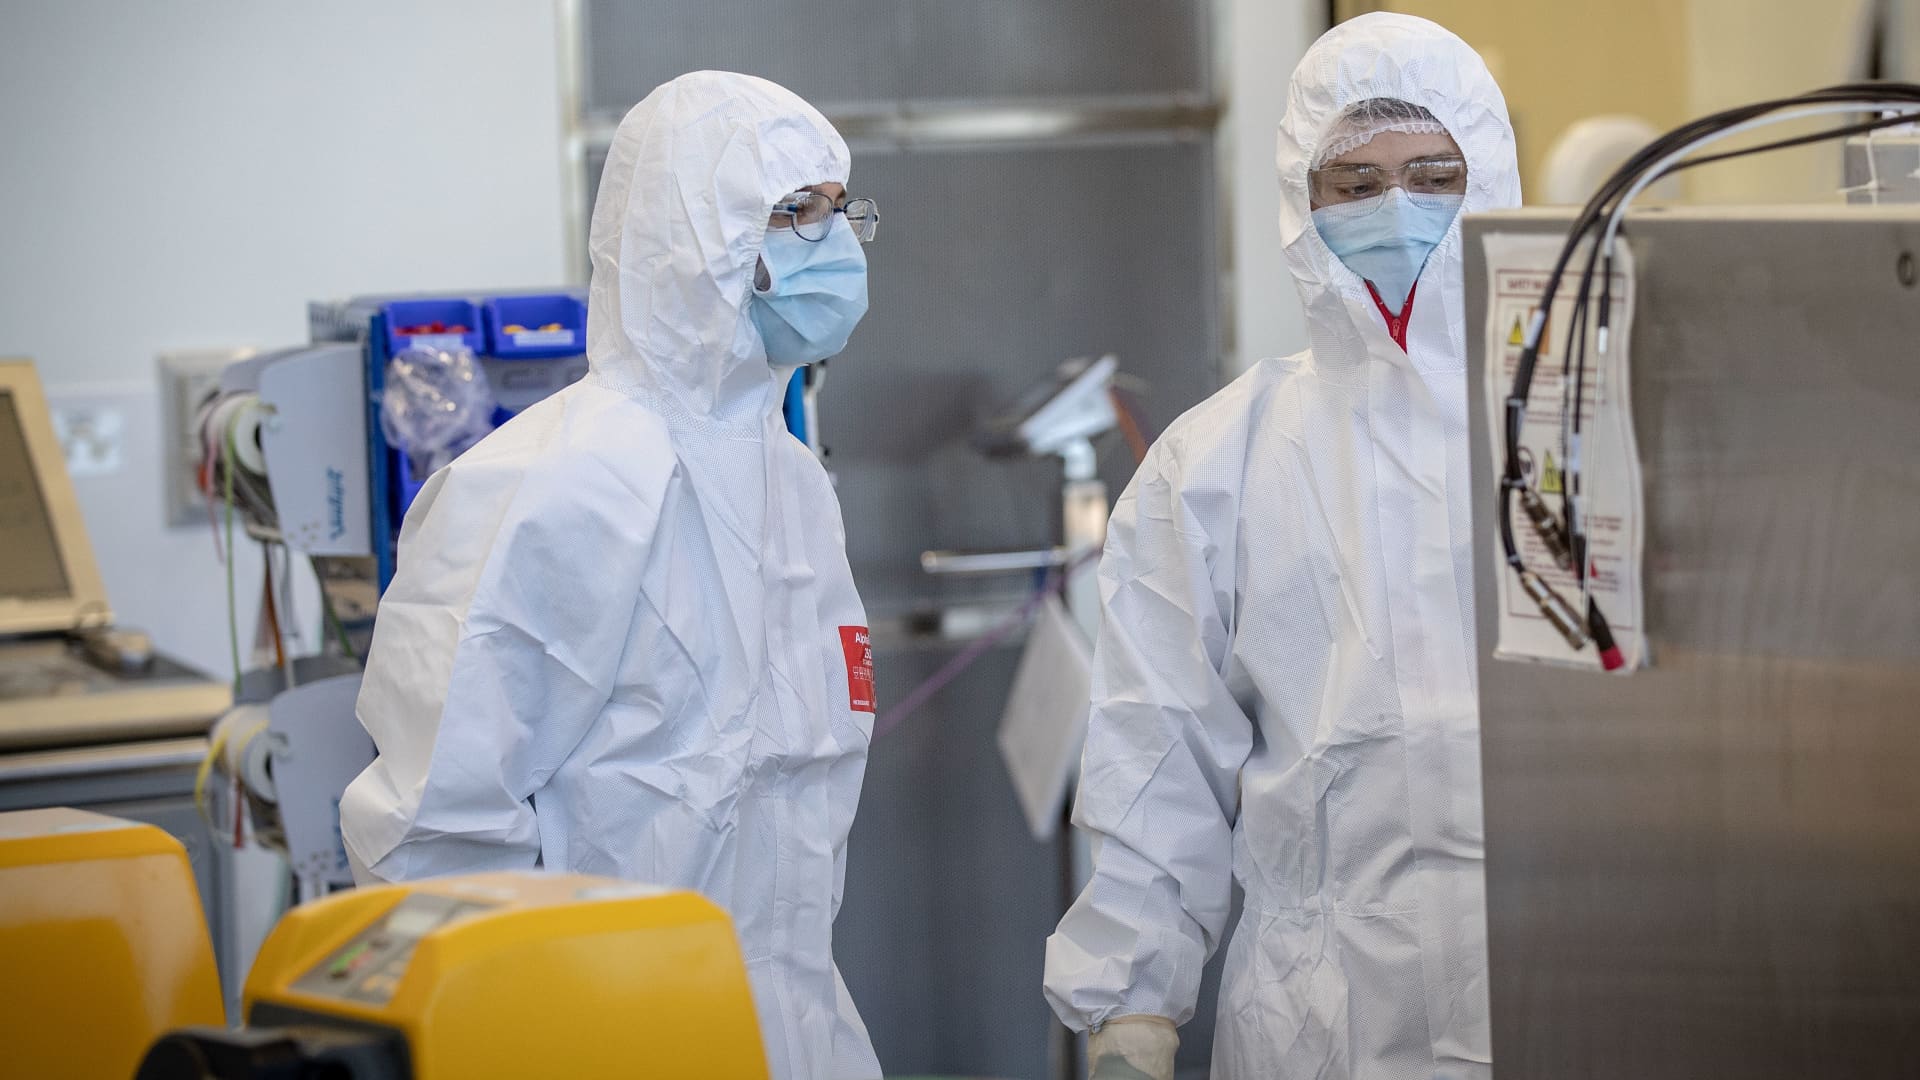 Staff at CSL are working in the lab on November 08, 2020 in Melbourne, Australia, where they will begin manufacturing AstraZeneca-Oxford University COVID-19 vaccine.